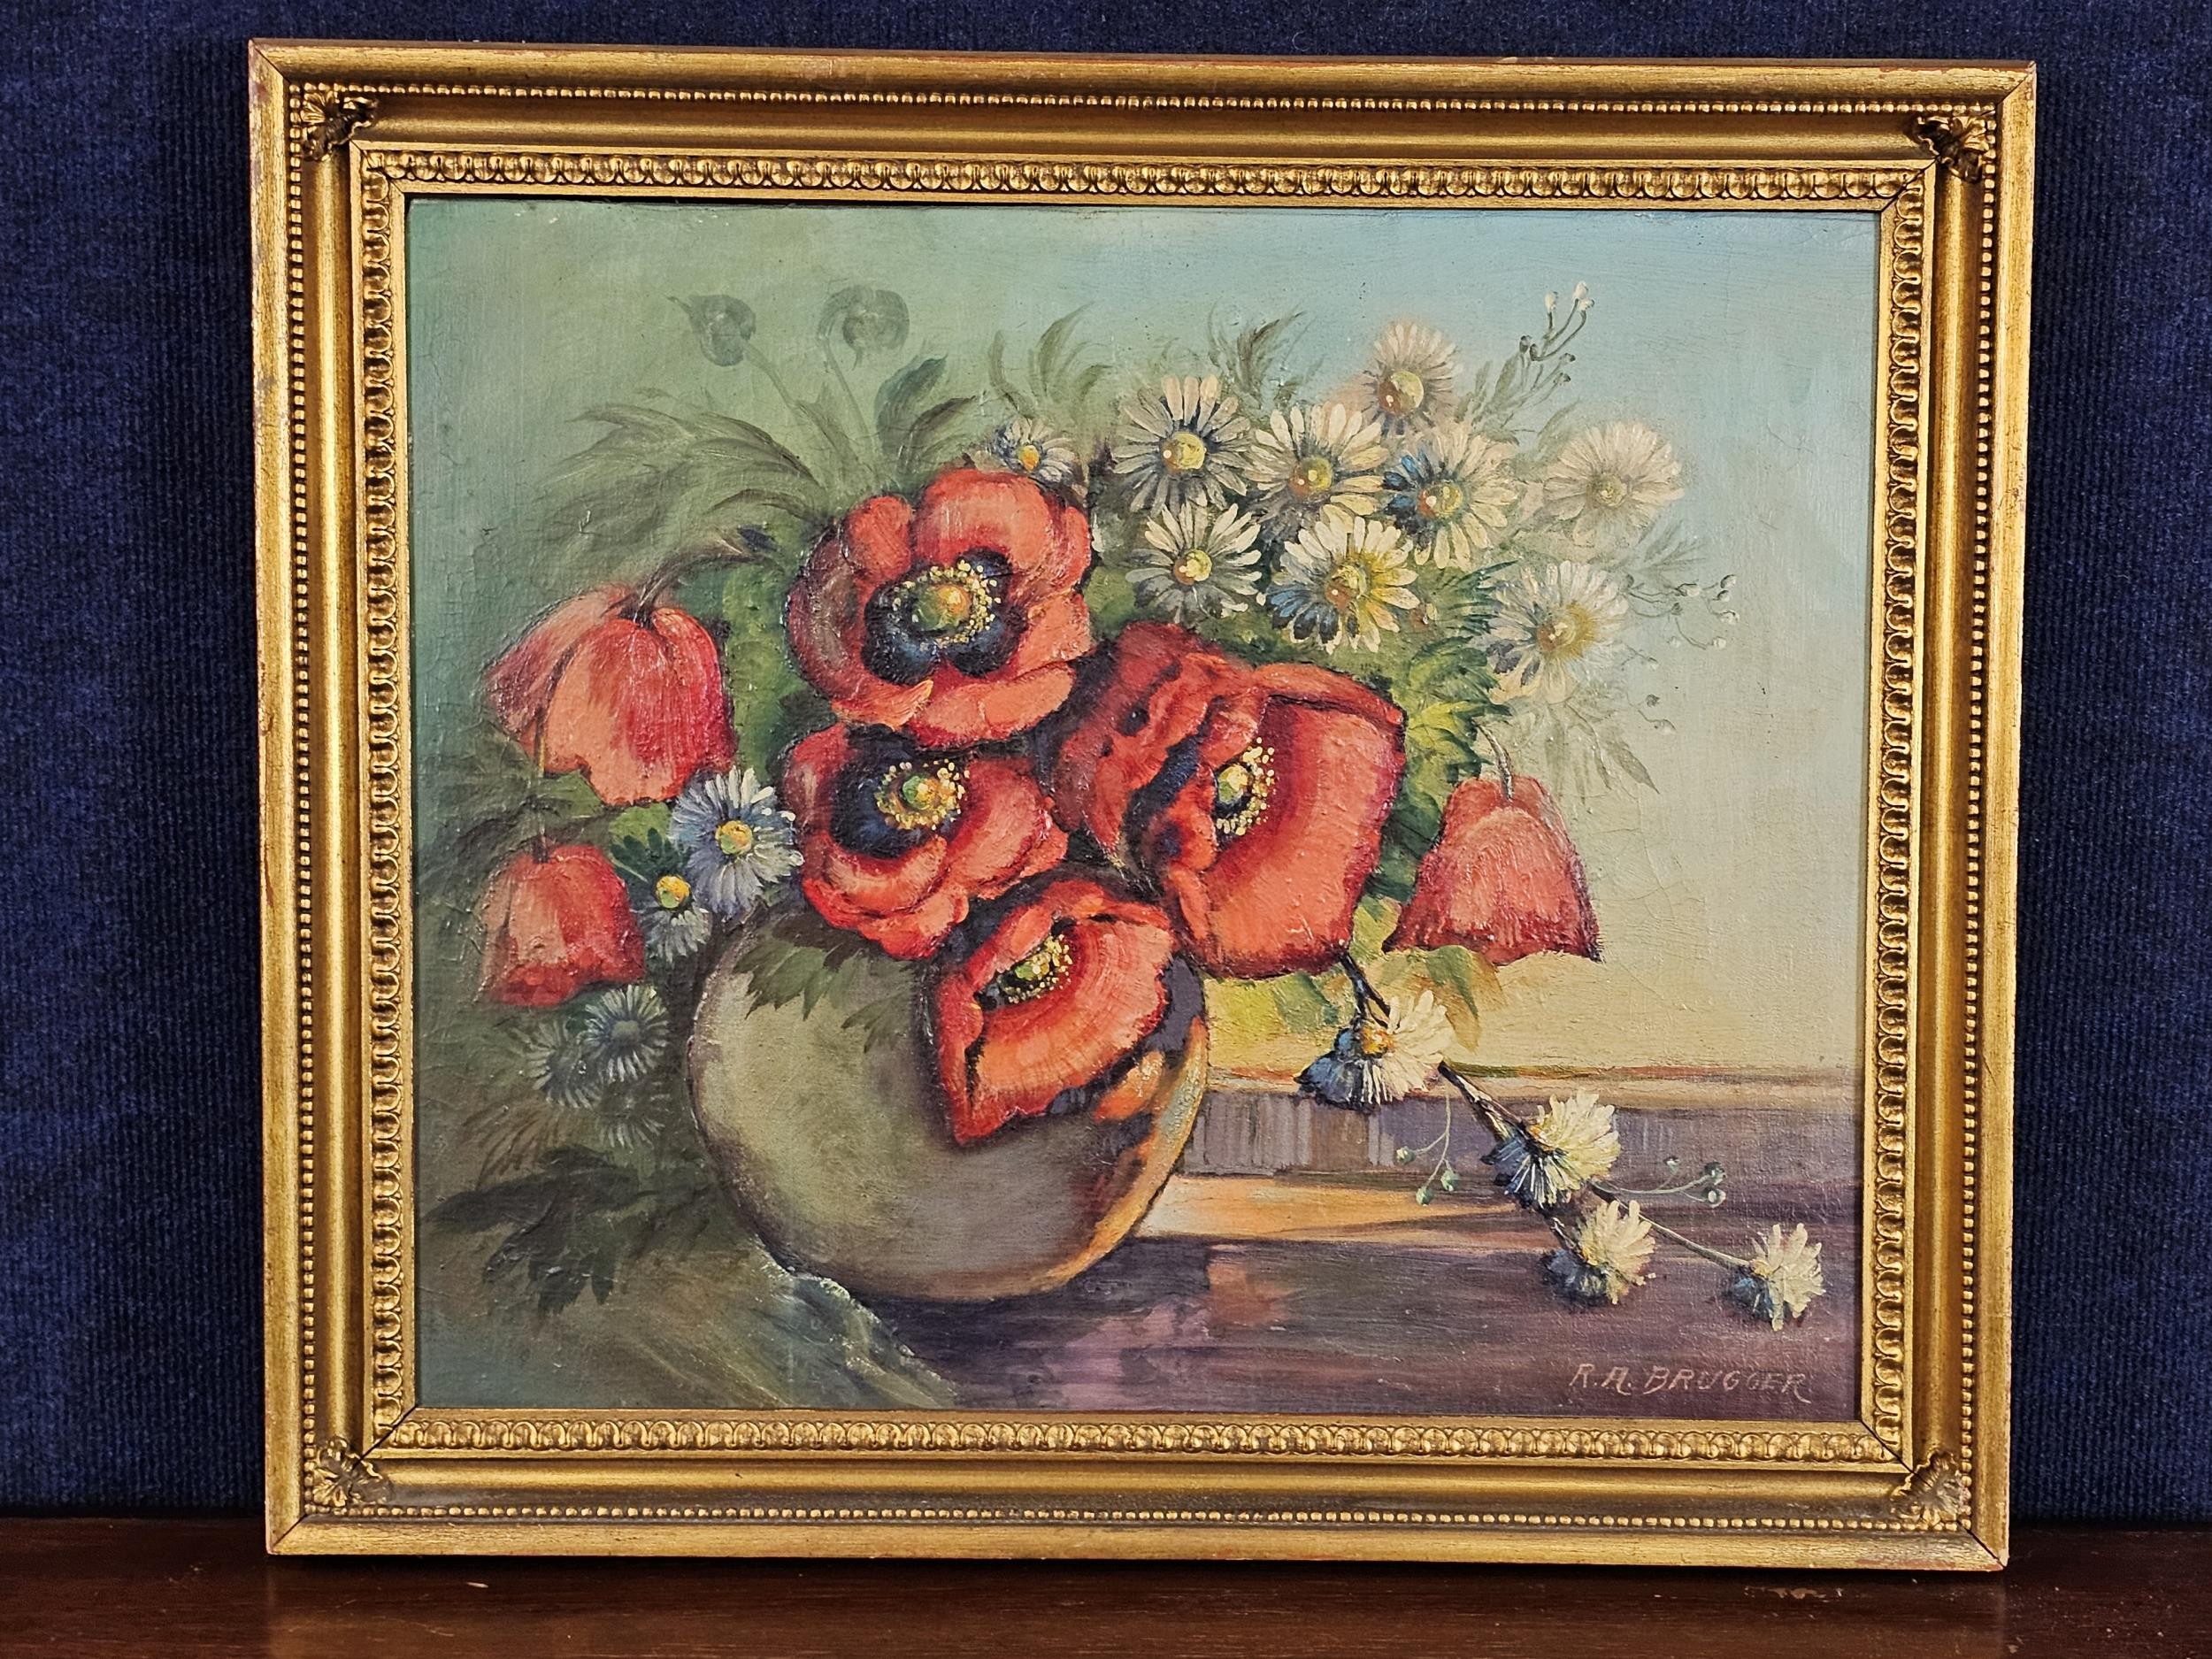 Oil on board, early 20th century, an oil on board, signed R A Brugger, in a giltwood frame. H.56 W. - Image 2 of 7